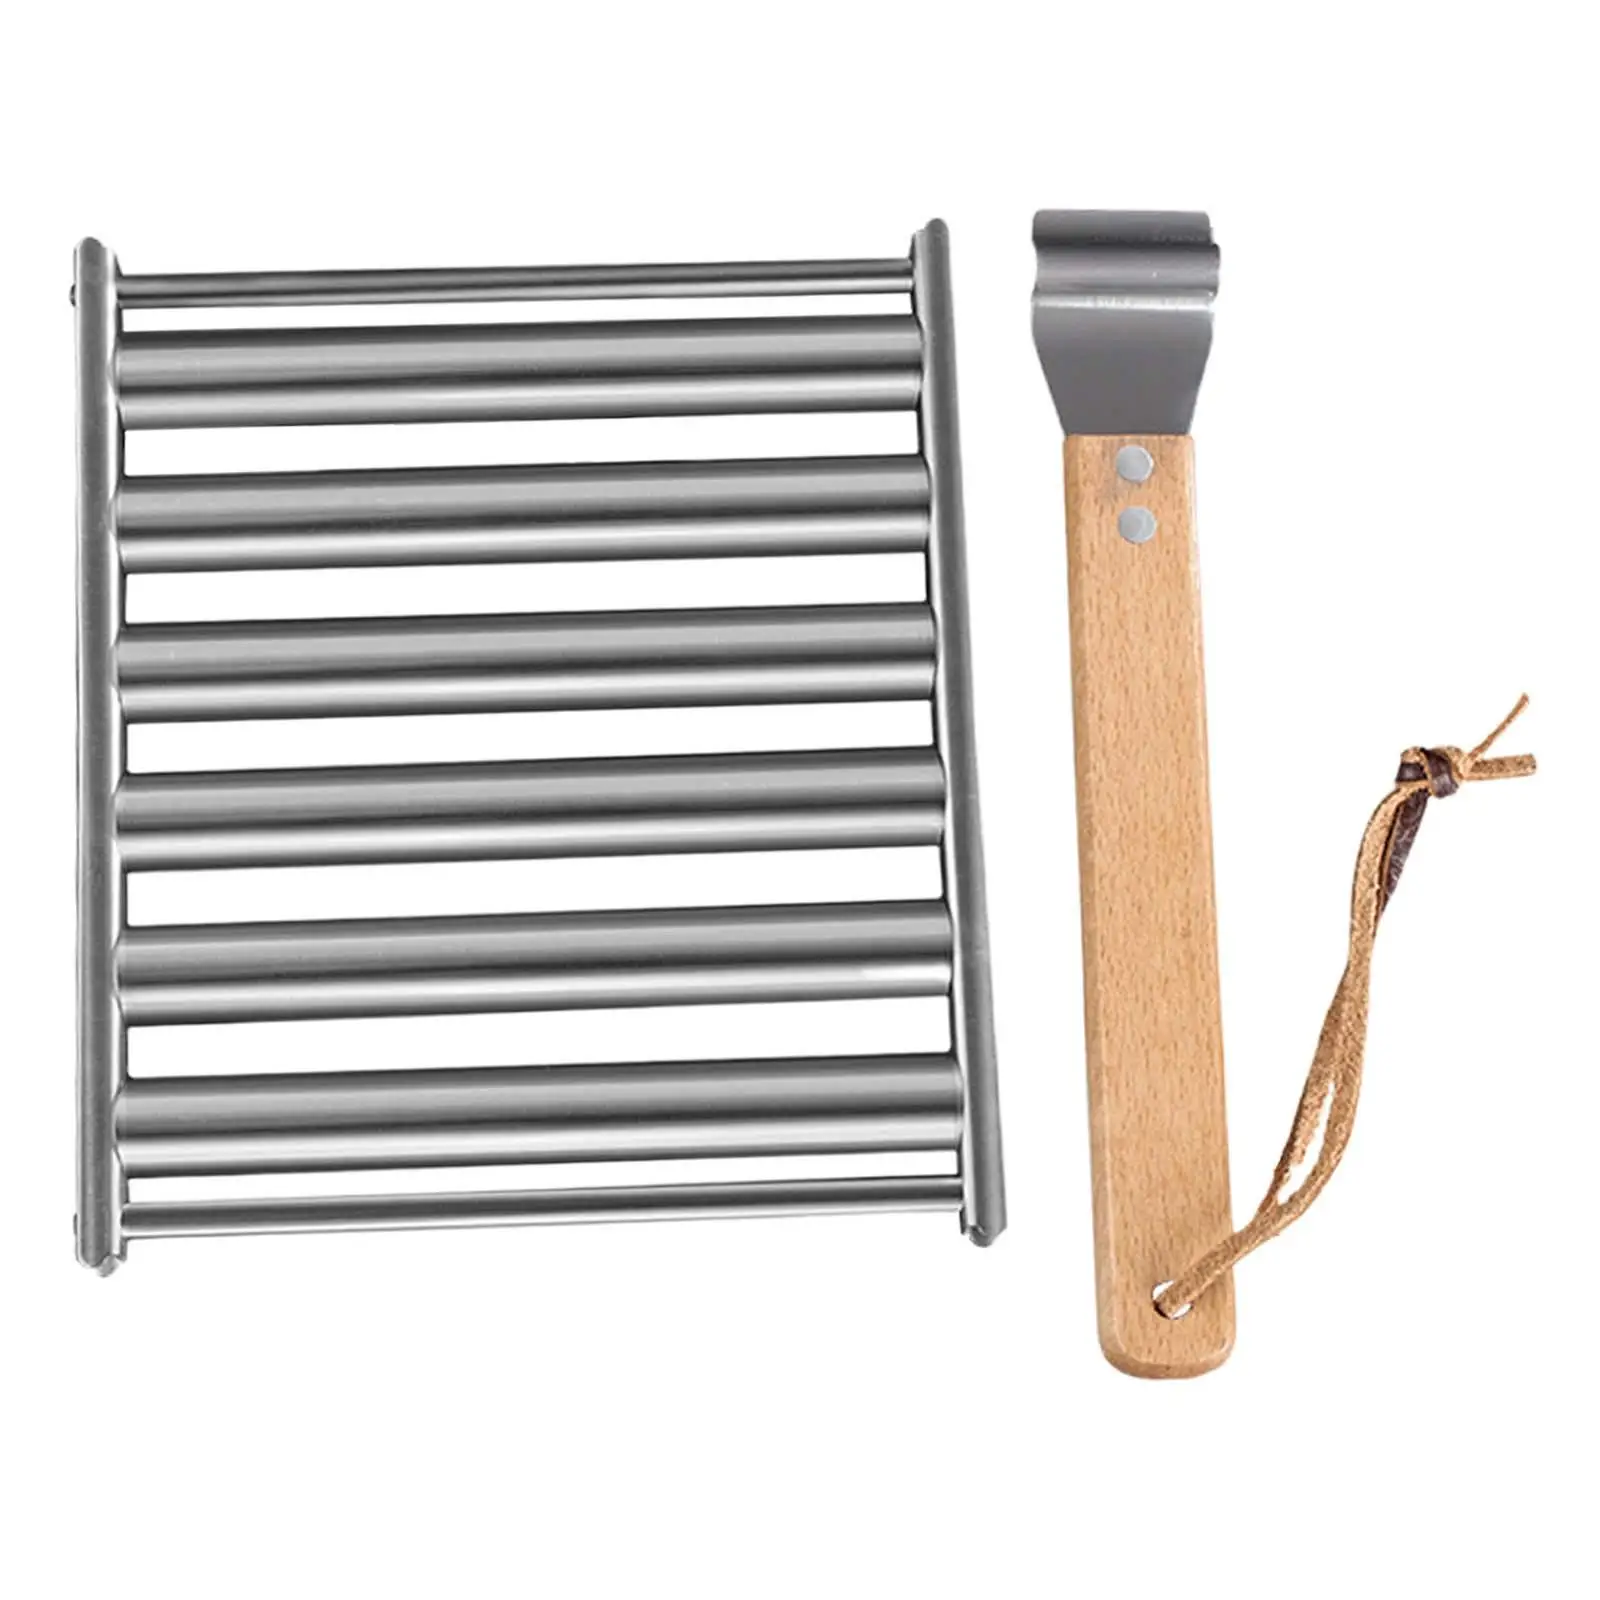 Hot Dog Grill Roller Stainless Steel Sausage Grill Roller Rack for Taquitos